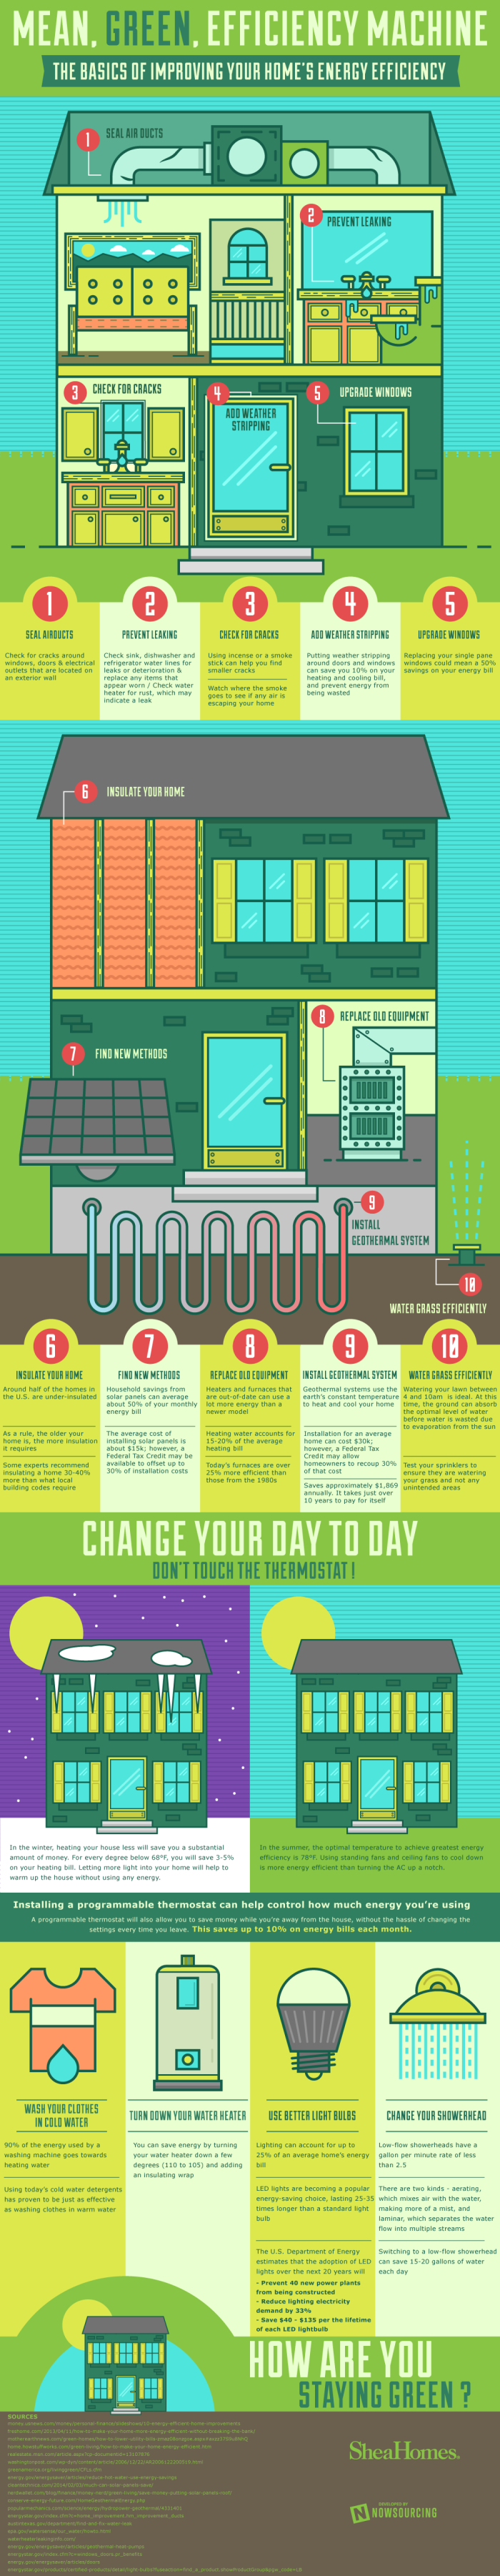 Improving-Home-Energy-Efficiency-Infographic